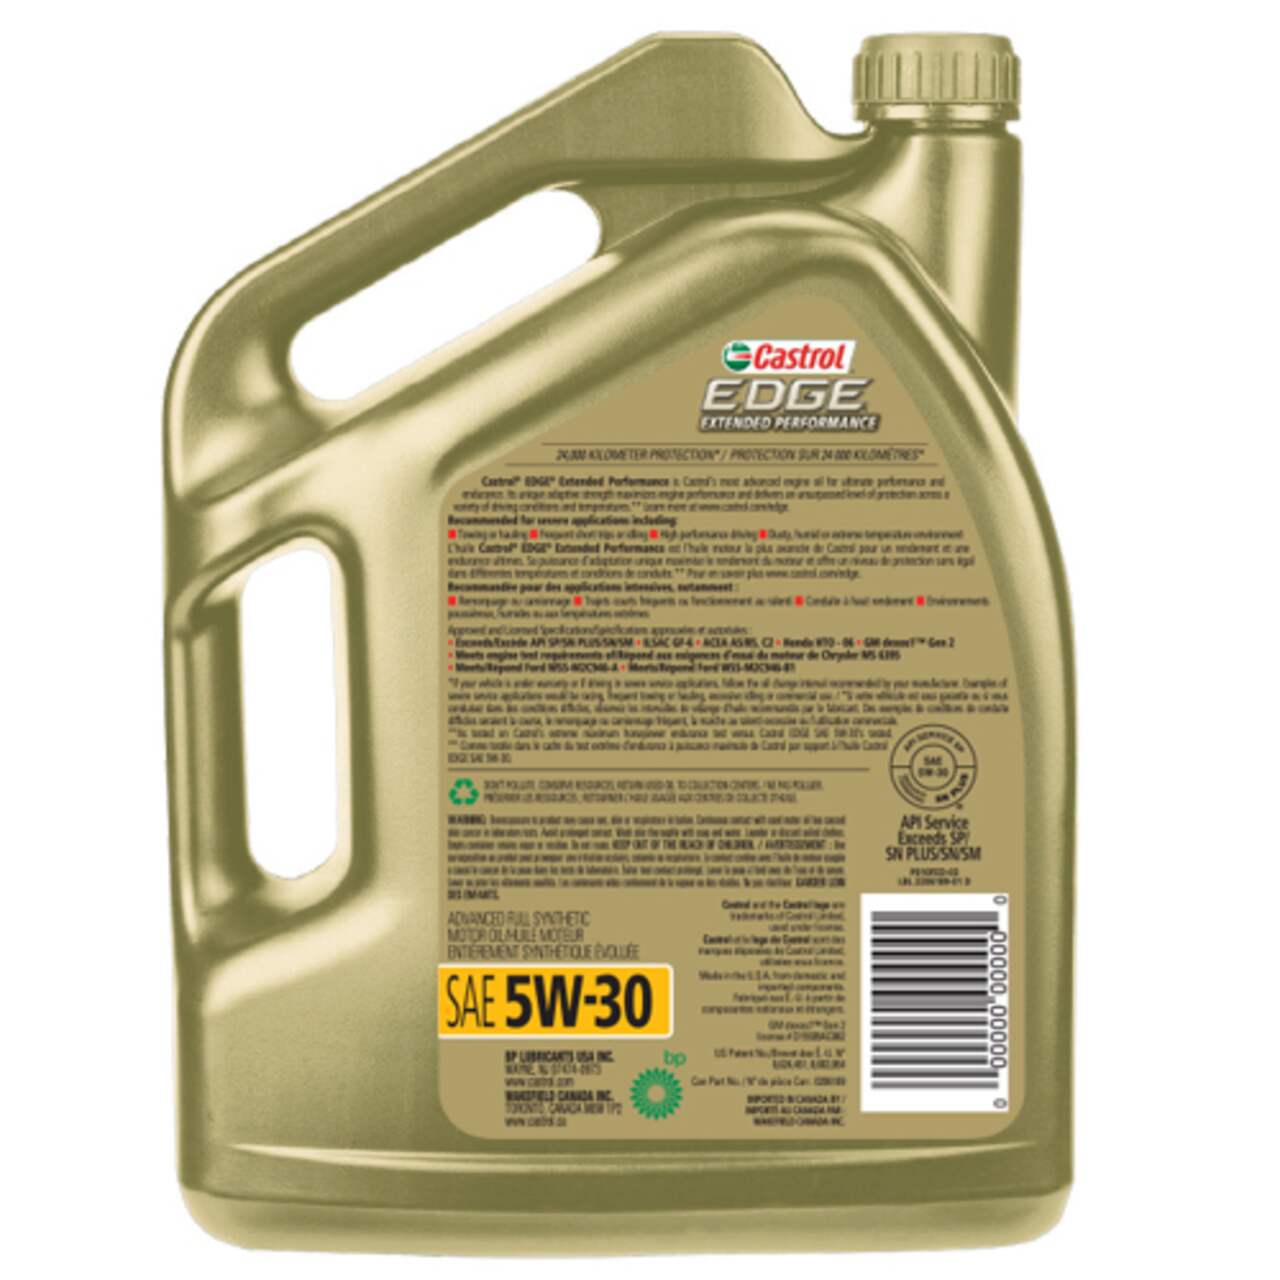 Castrol EDGE Extended Performance 5W30 Synthetic Engine/Motor Oil, 5-L